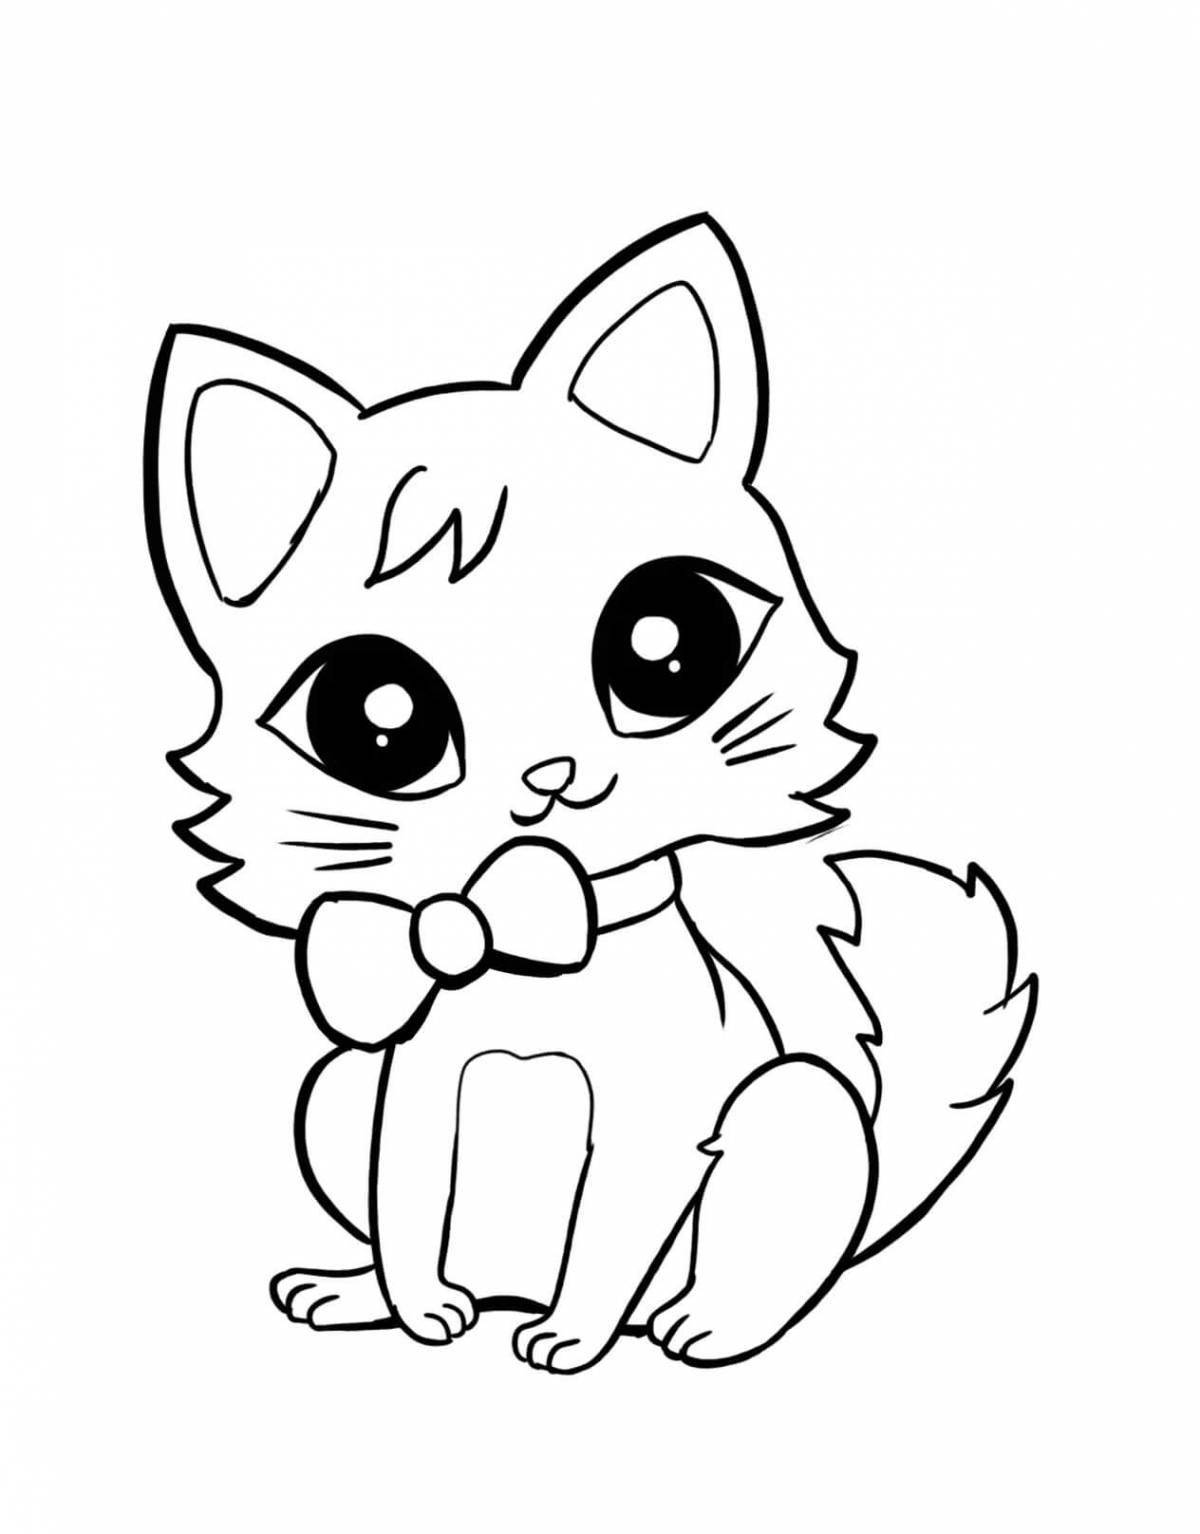 Coloring page energetic cat with a bow